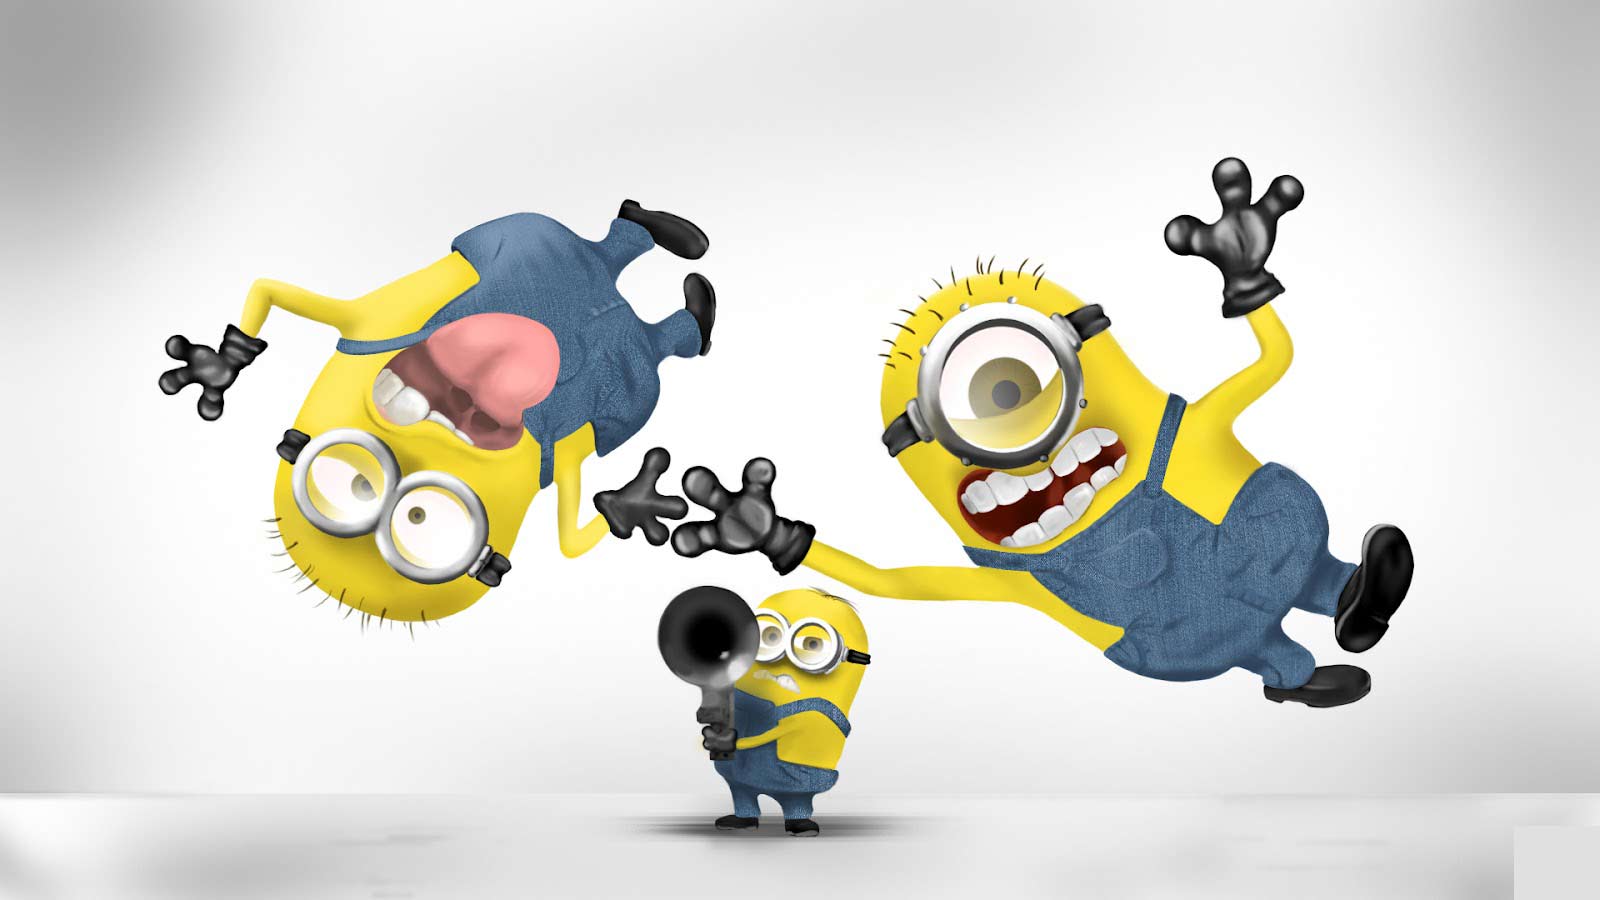 Despicable Me Minions Wallpaper Full HD Image Amp Pictures